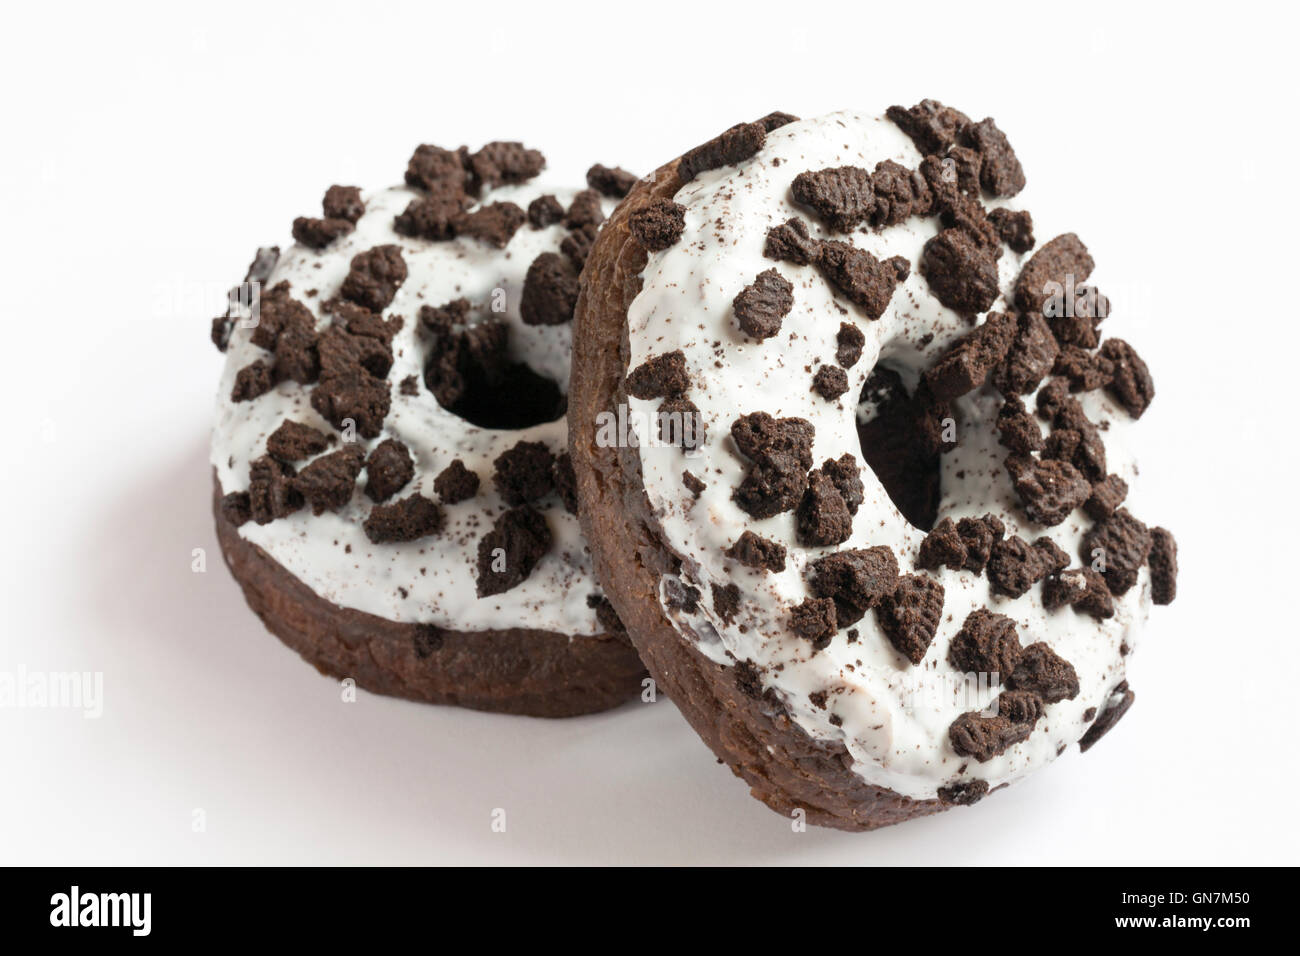 two Oreo doughnuts made with Oreo cookie pieces & with creme filling isolated on white background Stock Photo